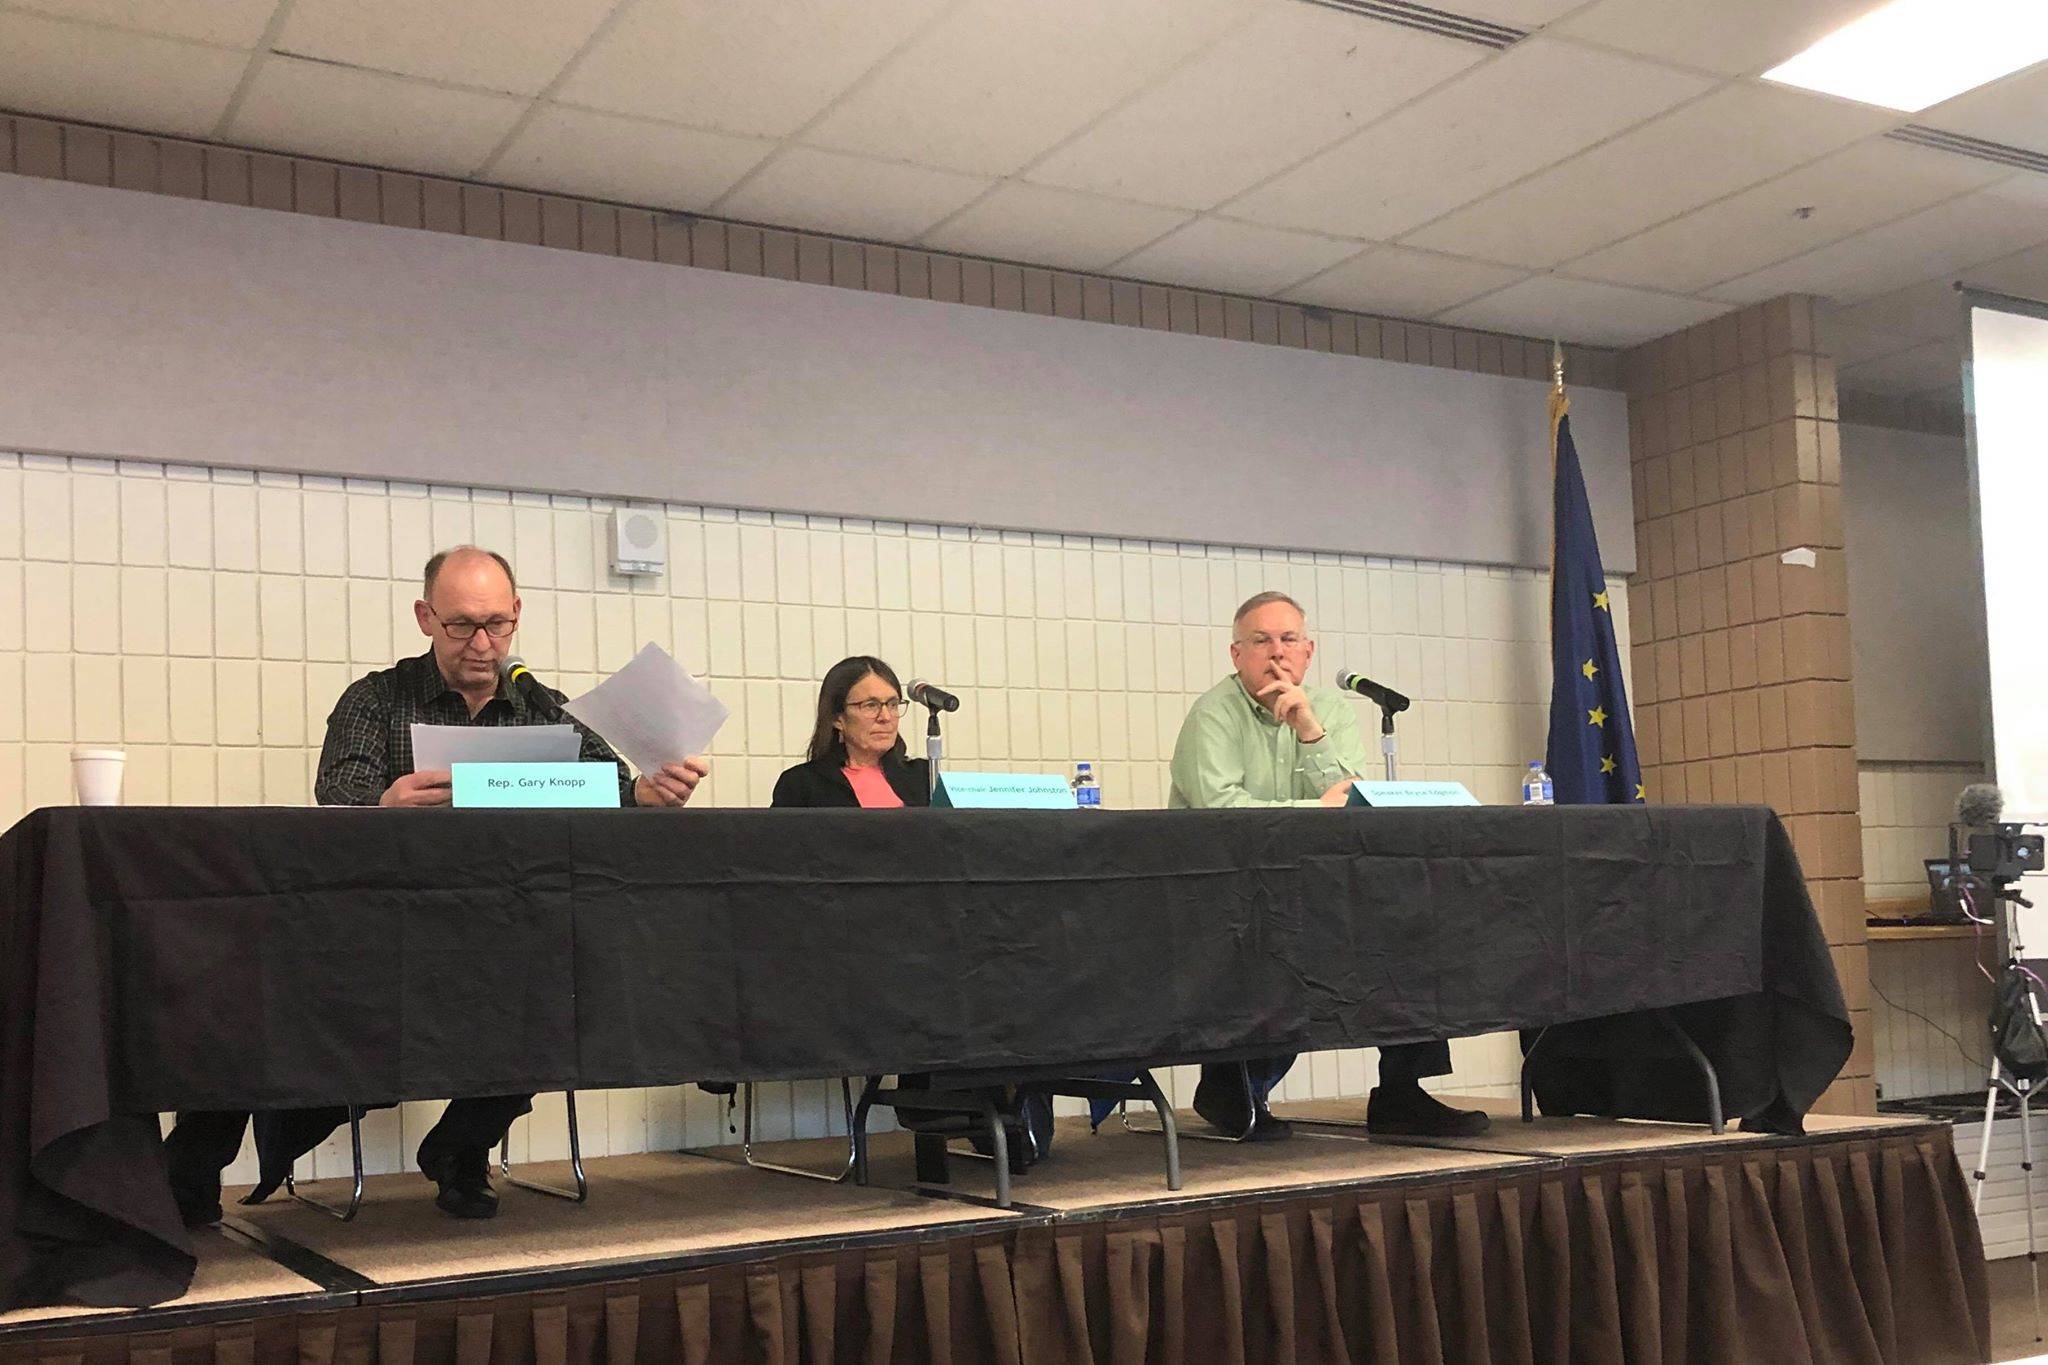 Rep. Gary Knopp (R-Kenai/Soldotna), House Speaker Bryce Edgmon (I-Dillingham) and Vice-Chair of the House Finance Committee Jennifer Johnston (R-Anchorage) listen to public testimony at a local House Finance Committee meeting at the Soldotna Regional Sports Complex on Saturday, March 23, 2019 in Soldotna, Alaska. (Photo by Victoria Petersen/Peninsula Clarion)